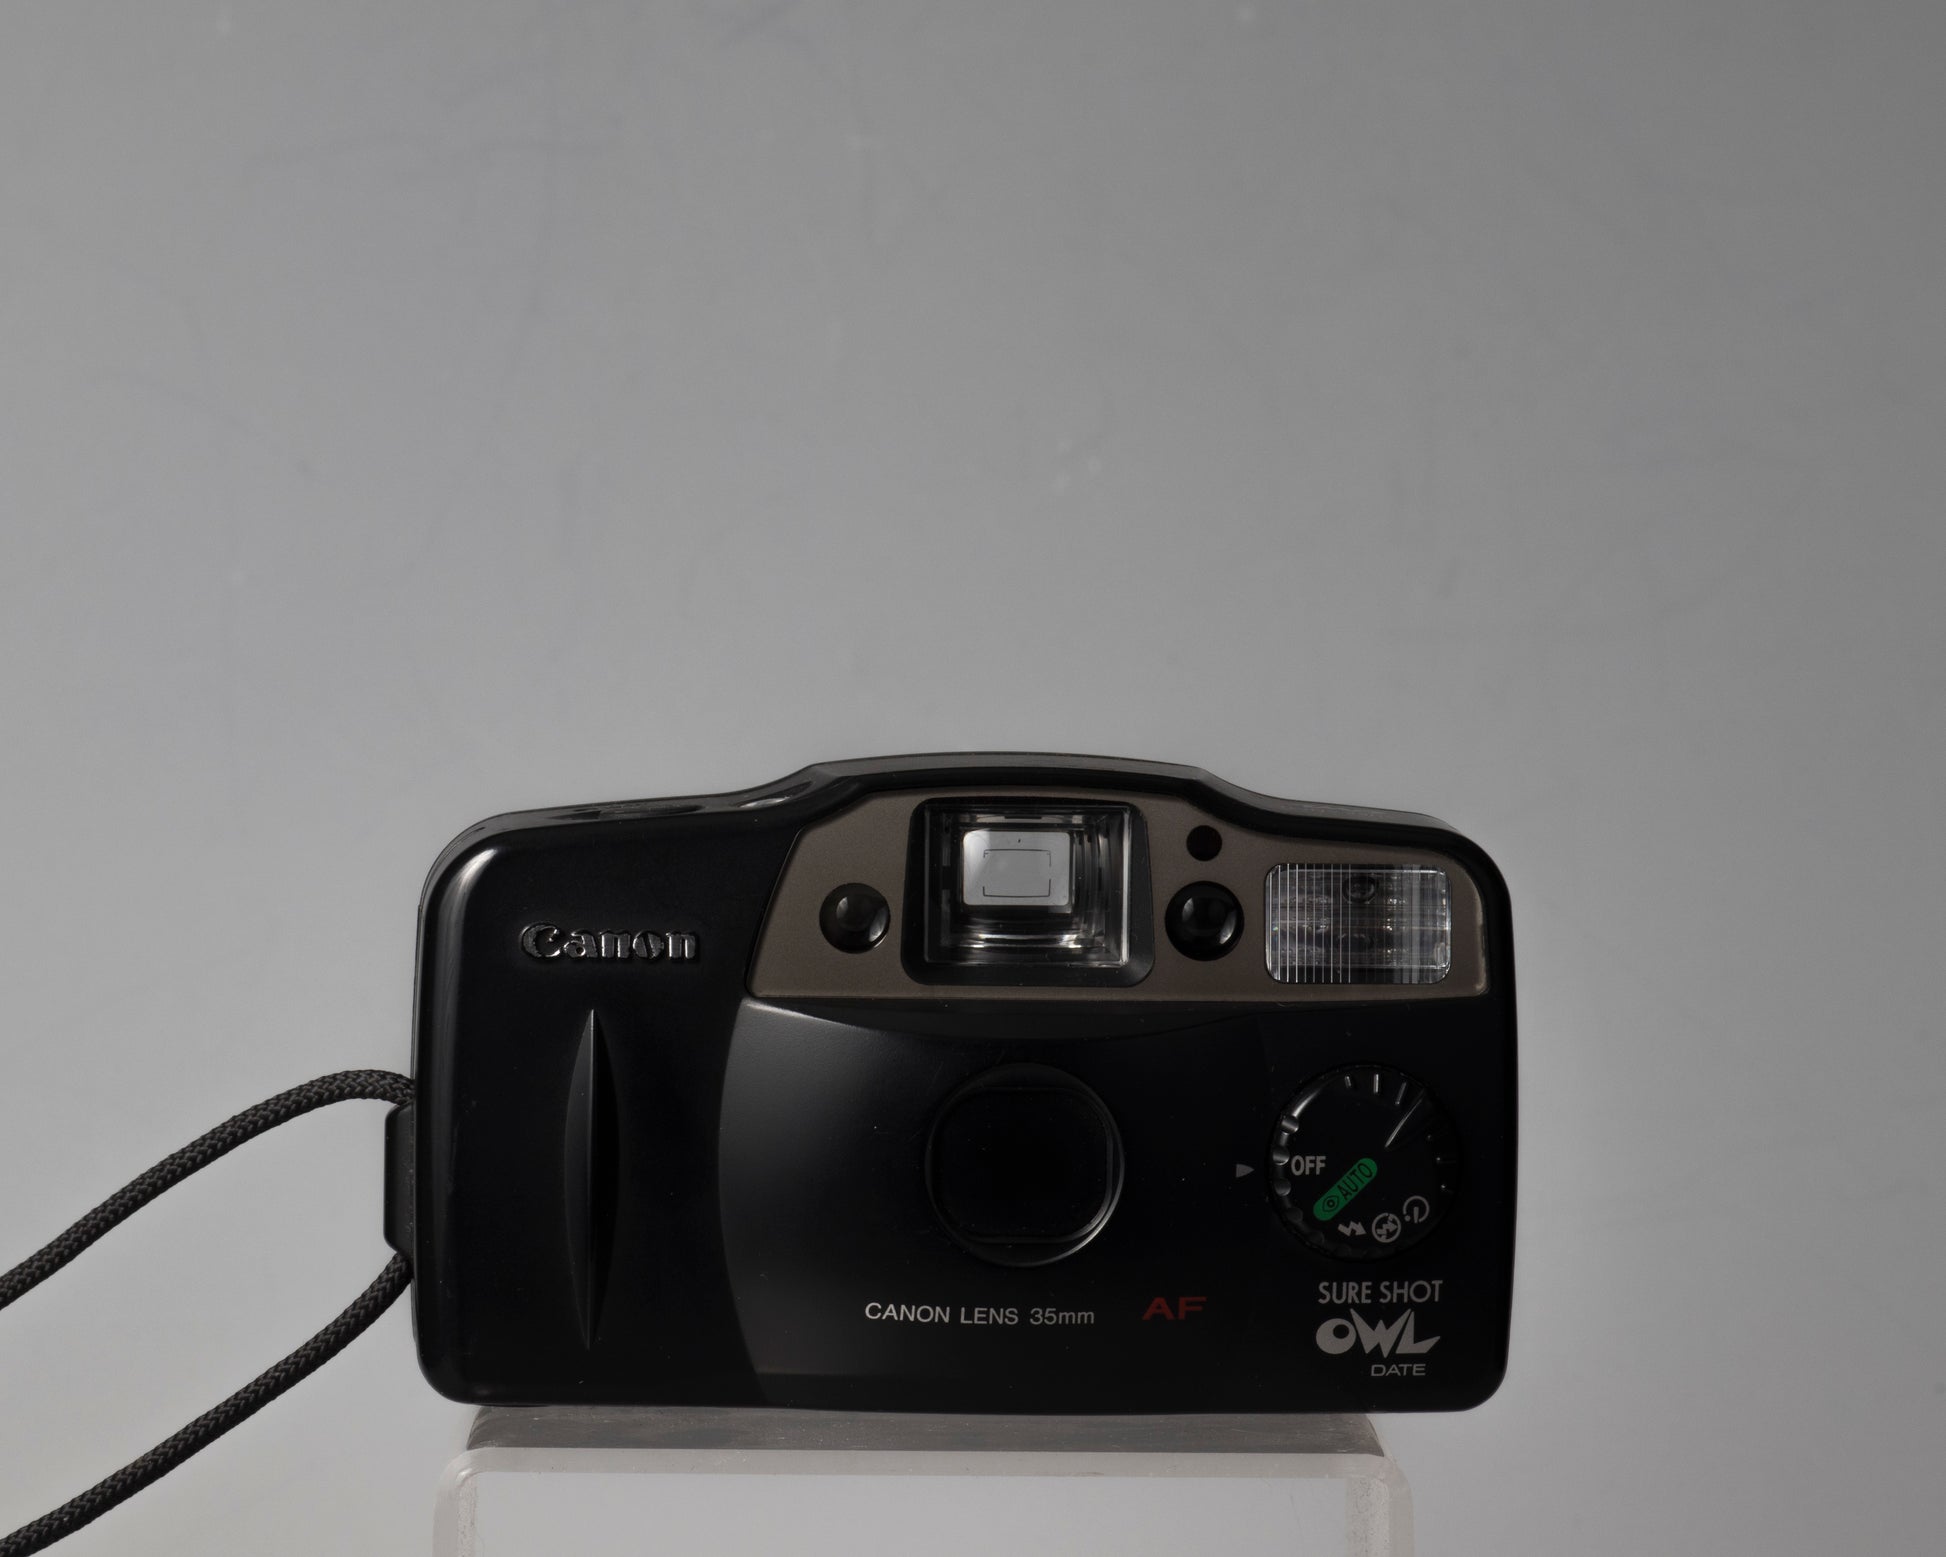 Canon Sure Shot Owl Date (shown with lens closed)